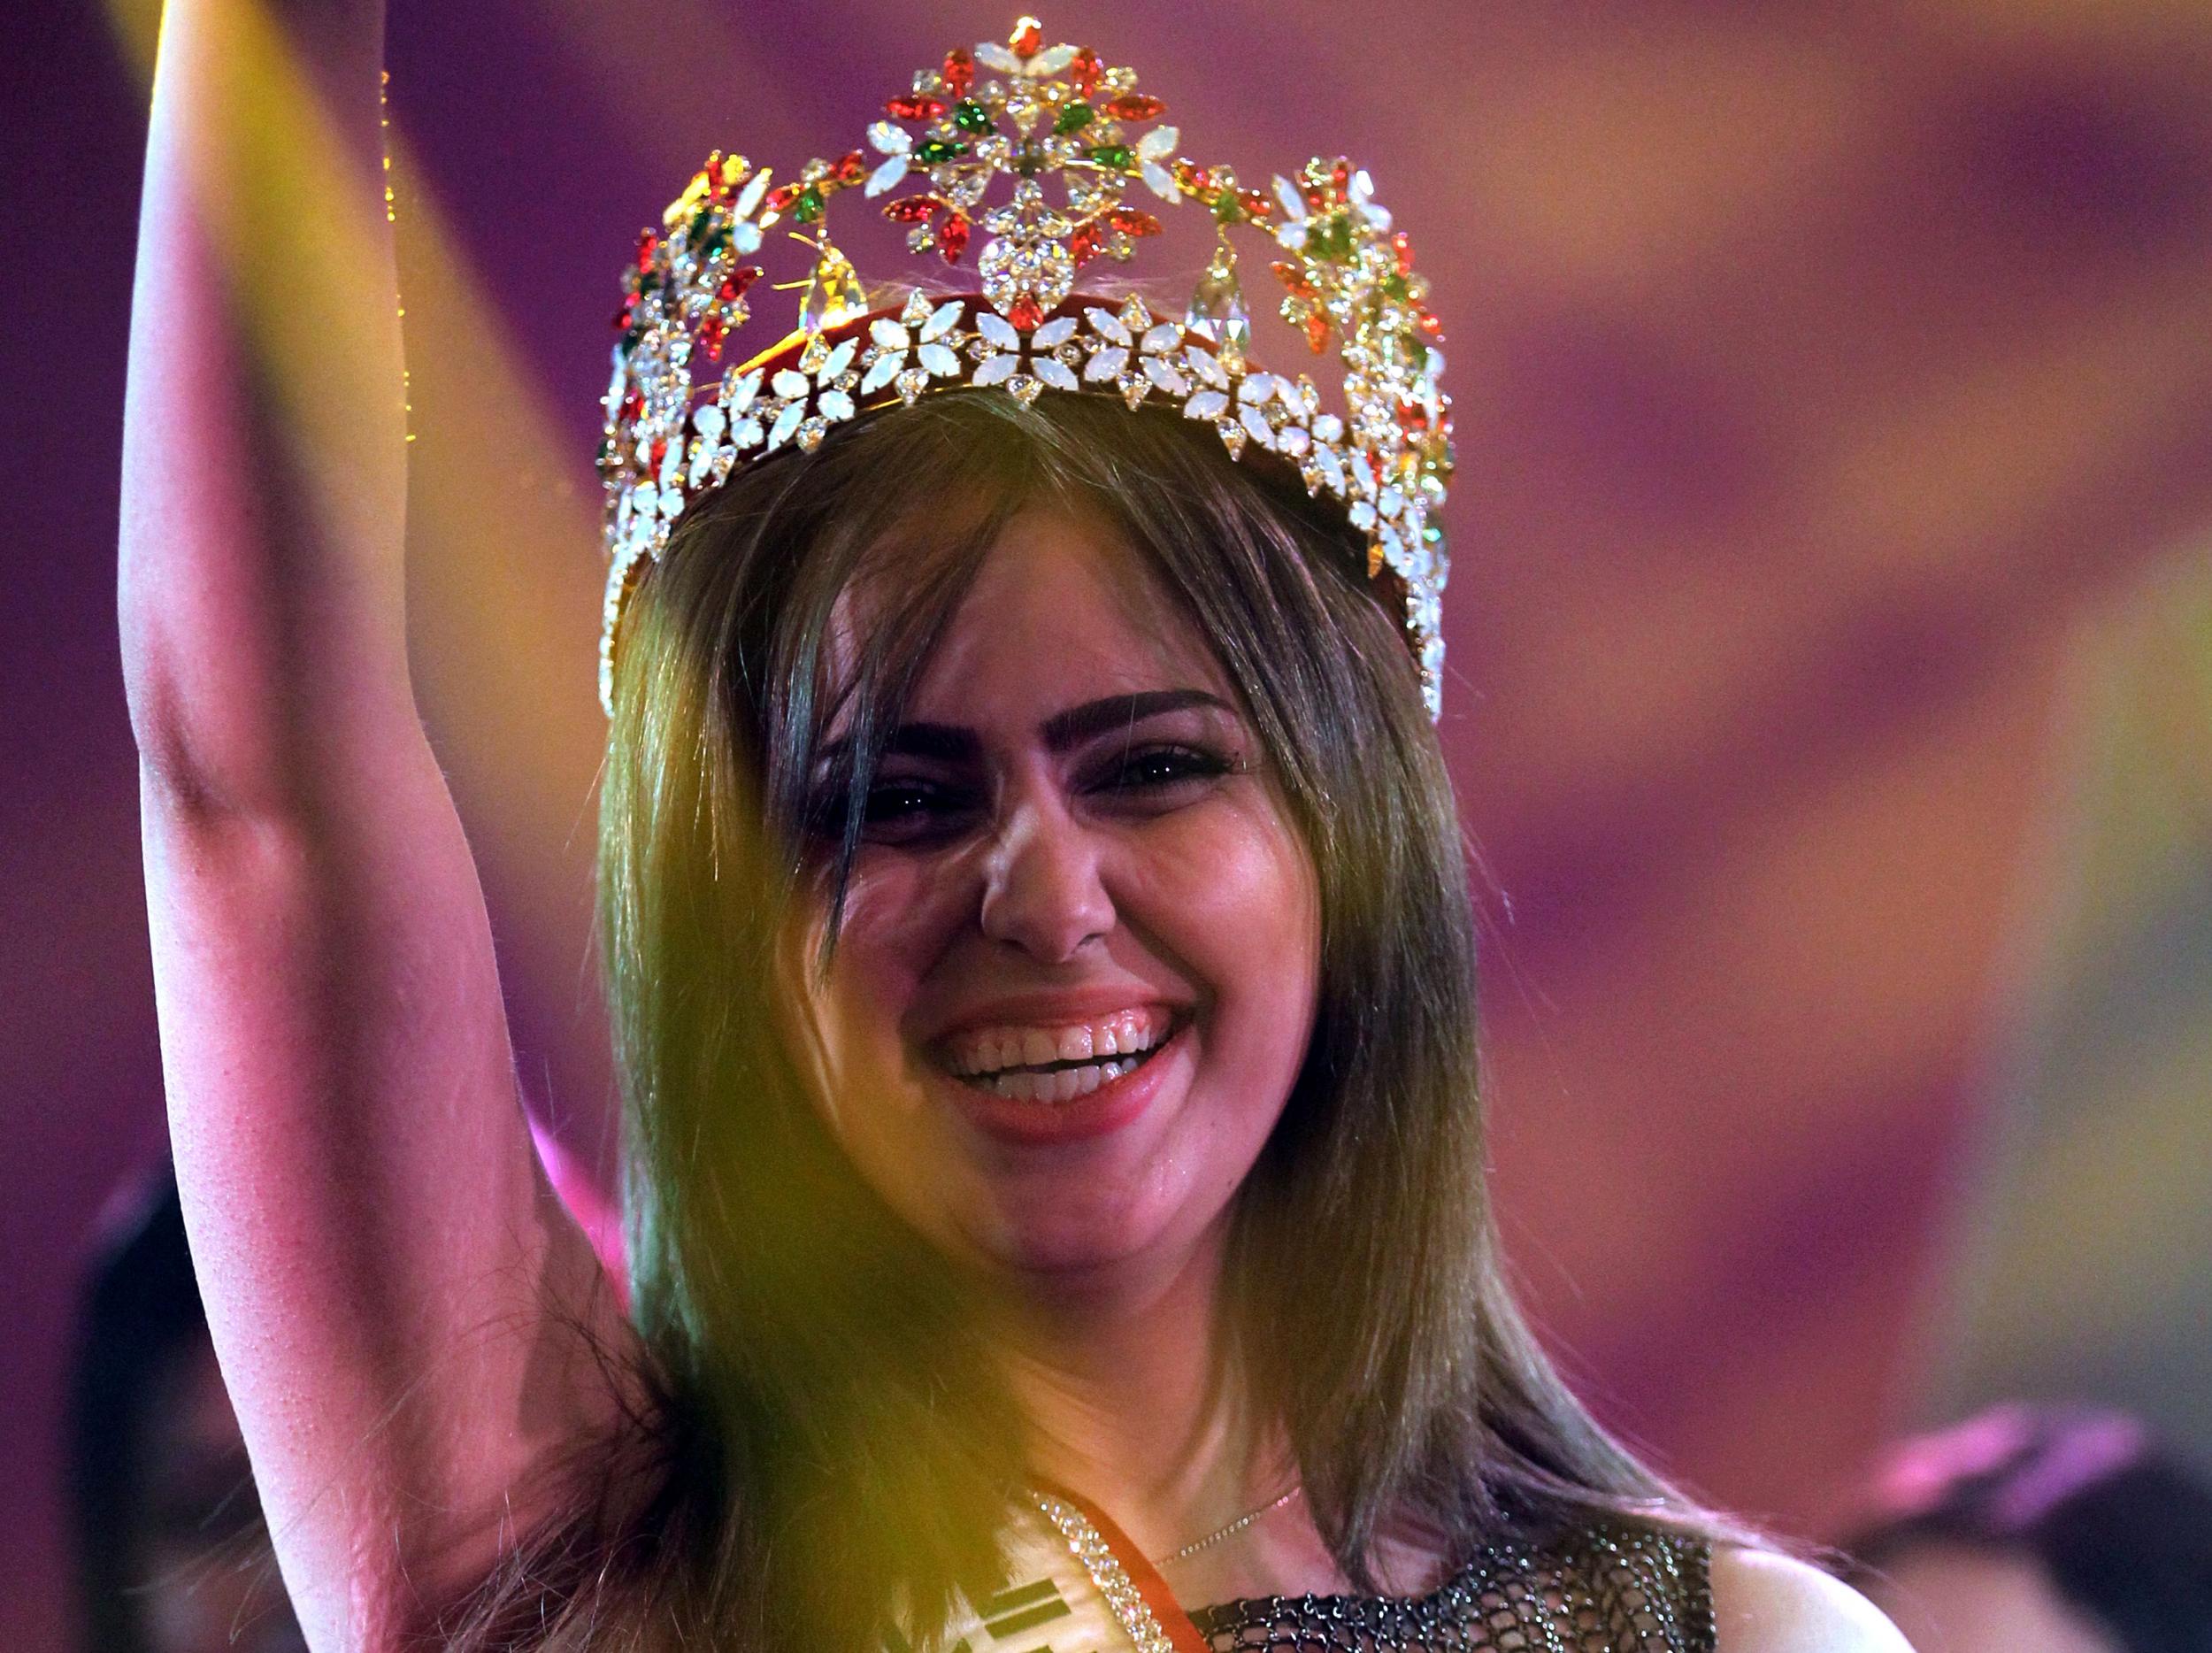 Shaimaa Qasim, from Kirkuk, waves after winning the Miss Iraq beauty contest on December 19, 2015 in the capital Baghdad. Photo: AHMAD AL-RUBAYE/AFP/Getty Images